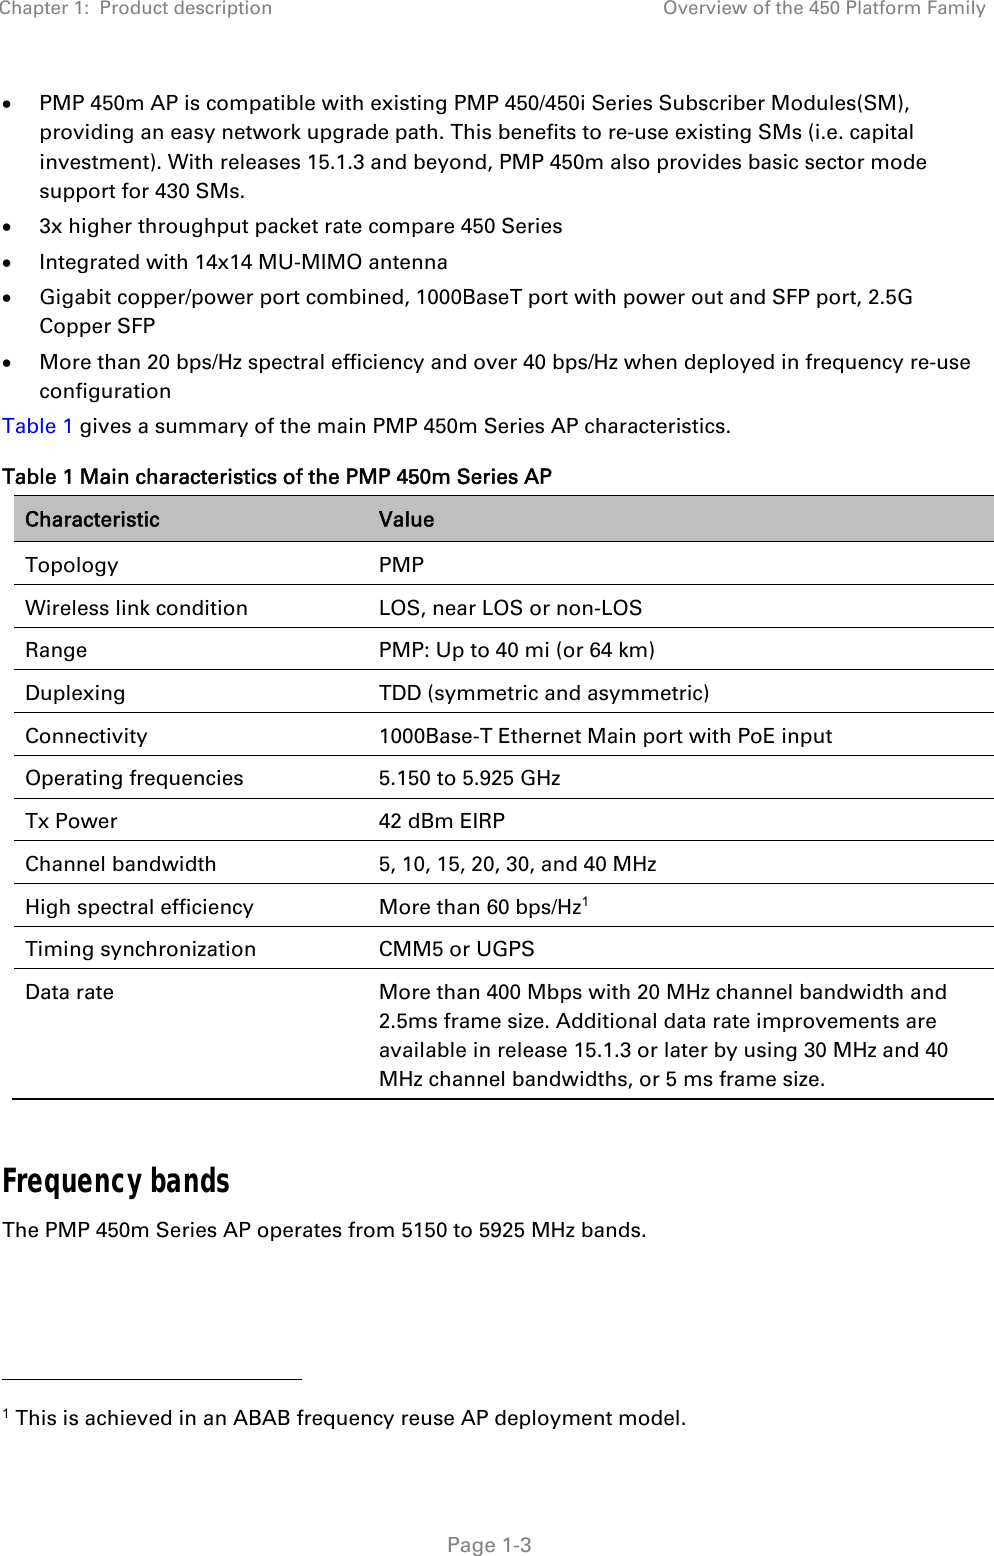 Chapter 1:  Product description  Overview of the 450 Platform Family   Page 1-3  PMP 450m AP is compatible with existing PMP 450/450i Series Subscriber Modules(SM), providing an easy network upgrade path. This benefits to re-use existing SMs (i.e. capital investment). With releases 15.1.3 and beyond, PMP 450m also provides basic sector mode support for 430 SMs.  3x higher throughput packet rate compare 450 Series  Integrated with 14x14 MU-MIMO antenna  Gigabit copper/power port combined, 1000BaseT port with power out and SFP port, 2.5G Copper SFP  More than 20 bps/Hz spectral efficiency and over 40 bps/Hz when deployed in frequency re-use configuration Table 1 gives a summary of the main PMP 450m Series AP characteristics. Table 1 Main characteristics of the PMP 450m Series AP Characteristic  Value Topology PMP Wireless link condition  LOS, near LOS or non-LOS Range  PMP: Up to 40 mi (or 64 km) Duplexing  TDD (symmetric and asymmetric) Connectivity  1000Base-T Ethernet Main port with PoE input Operating frequencies  5.150 to 5.925 GHz Tx Power  42 dBm EIRP Channel bandwidth  5, 10, 15, 20, 30, and 40 MHz High spectral efficiency  More than 60 bps/Hz1 Timing synchronization  CMM5 or UGPS Data rate  More than 400 Mbps with 20 MHz channel bandwidth and 2.5ms frame size. Additional data rate improvements are available in release 15.1.3 or later by using 30 MHz and 40 MHz channel bandwidths, or 5 ms frame size.  Frequency bands The PMP 450m Series AP operates from 5150 to 5925 MHz bands.                                                 1 This is achieved in an ABAB frequency reuse AP deployment model. 